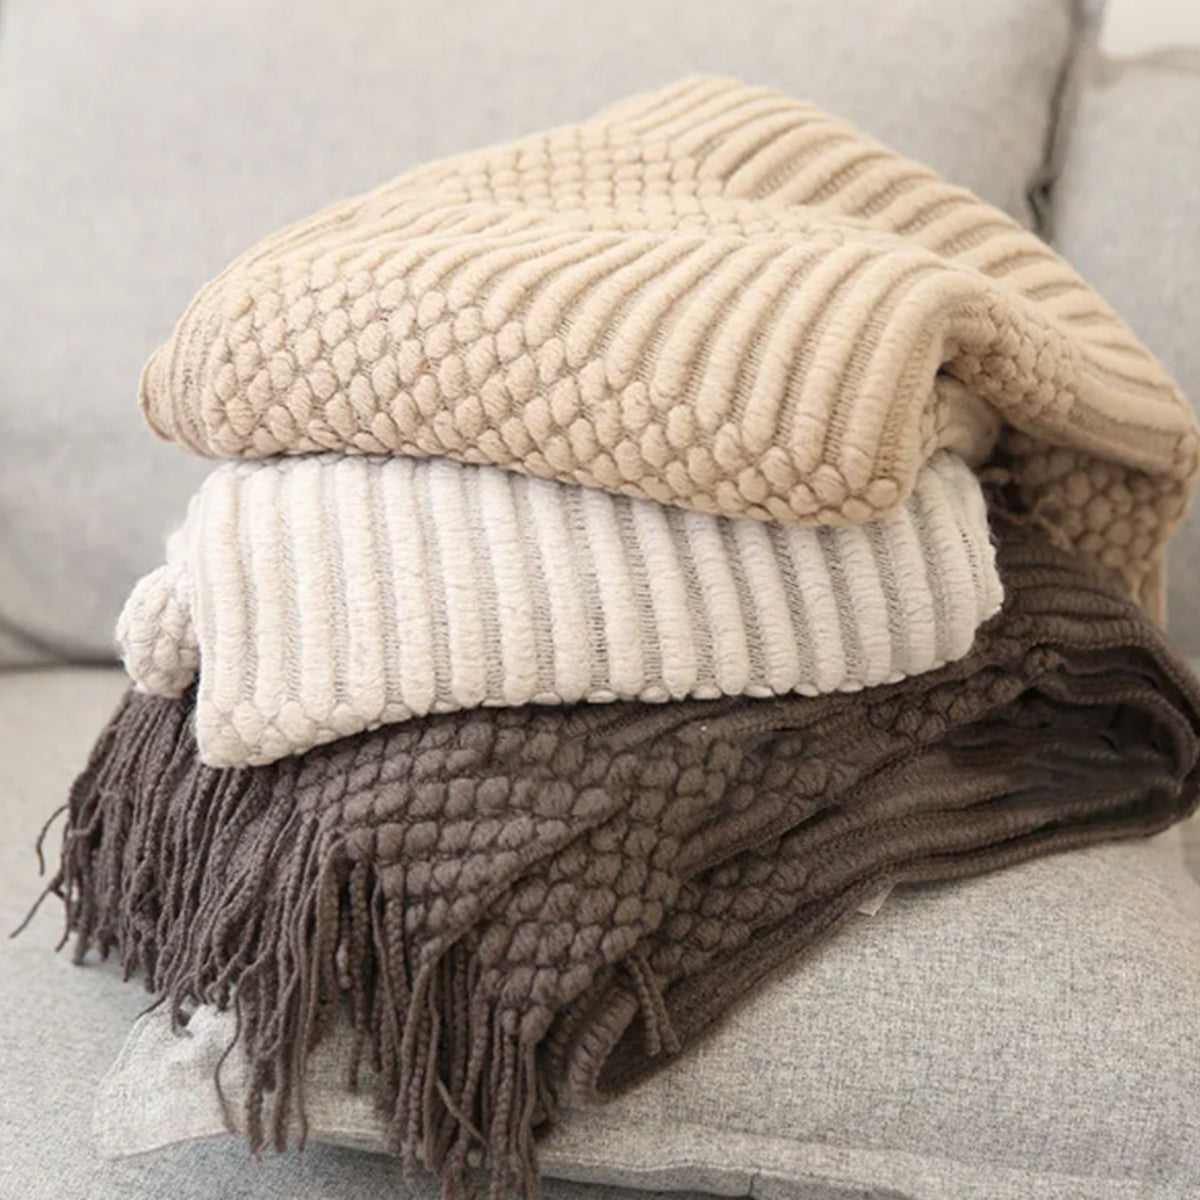 Textured Knit Blankets in Cozy Nordic Style